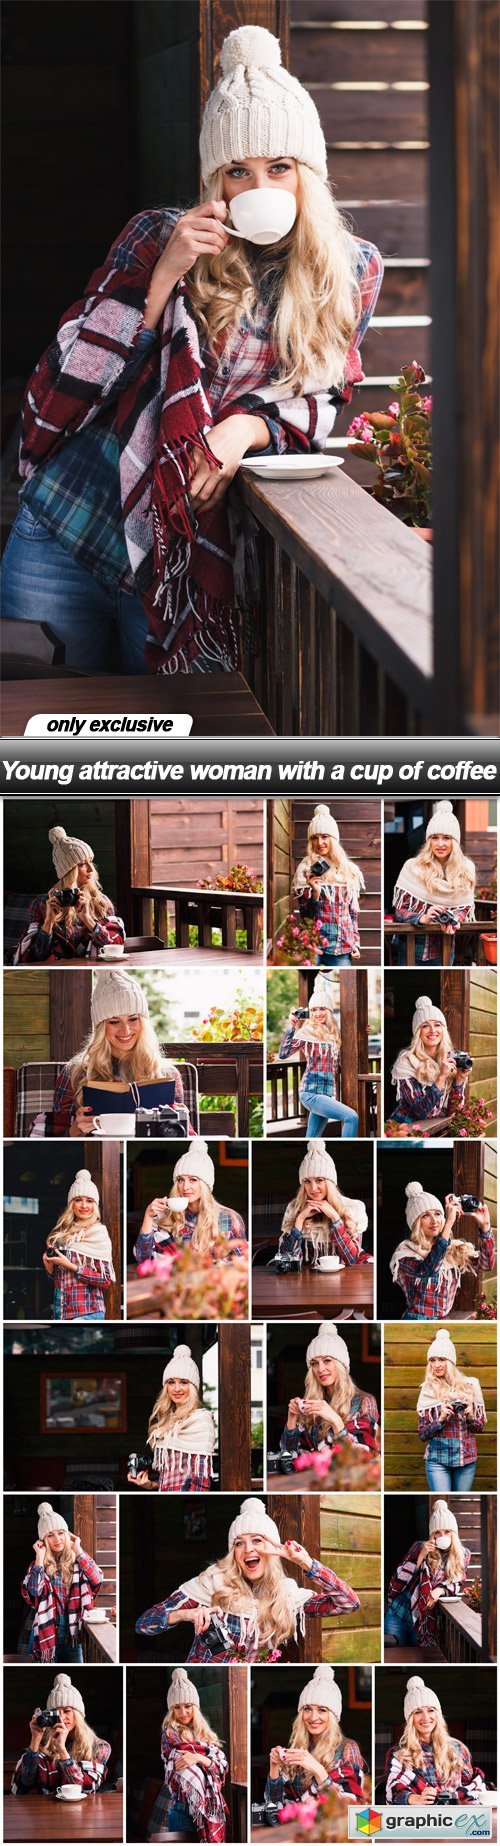 Young attractive woman with a cup of coffee - 20 UHQ JPEG